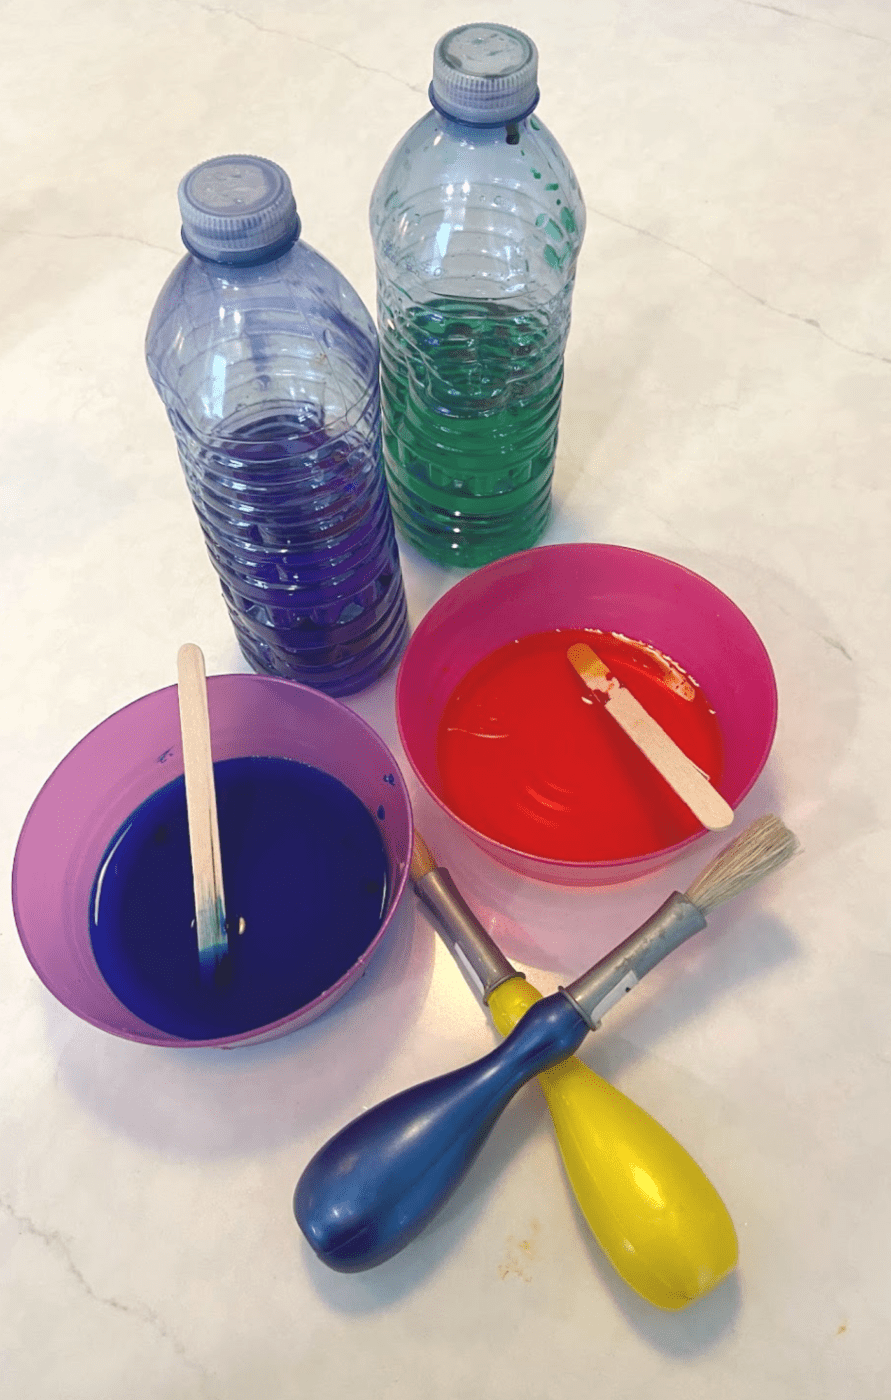 Materials for snow painting: Bottles with water and food coloring, and two paint brushes.